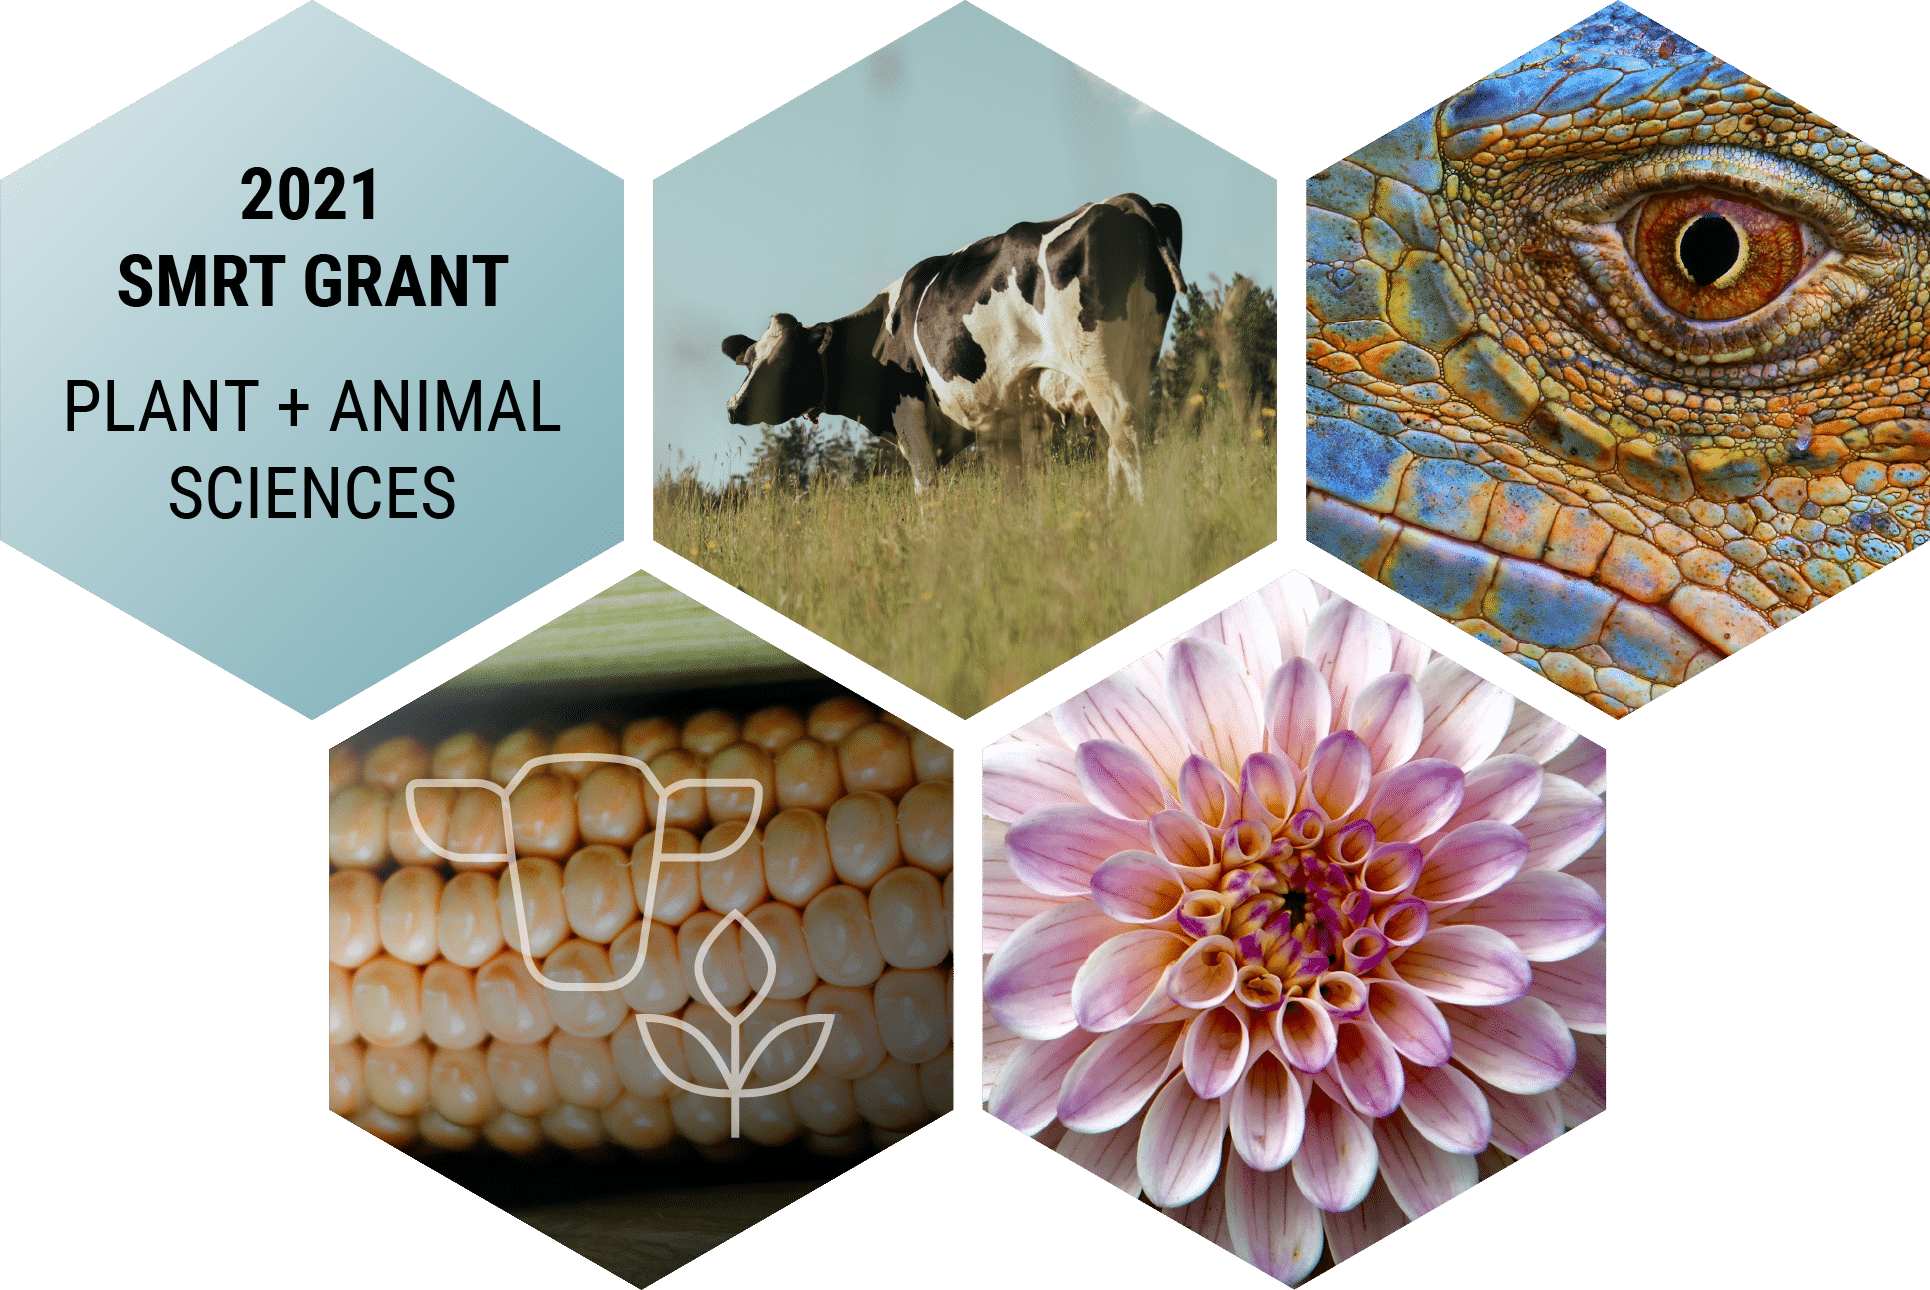 2021 Plant and Animal Sciences SMRT Grant Image